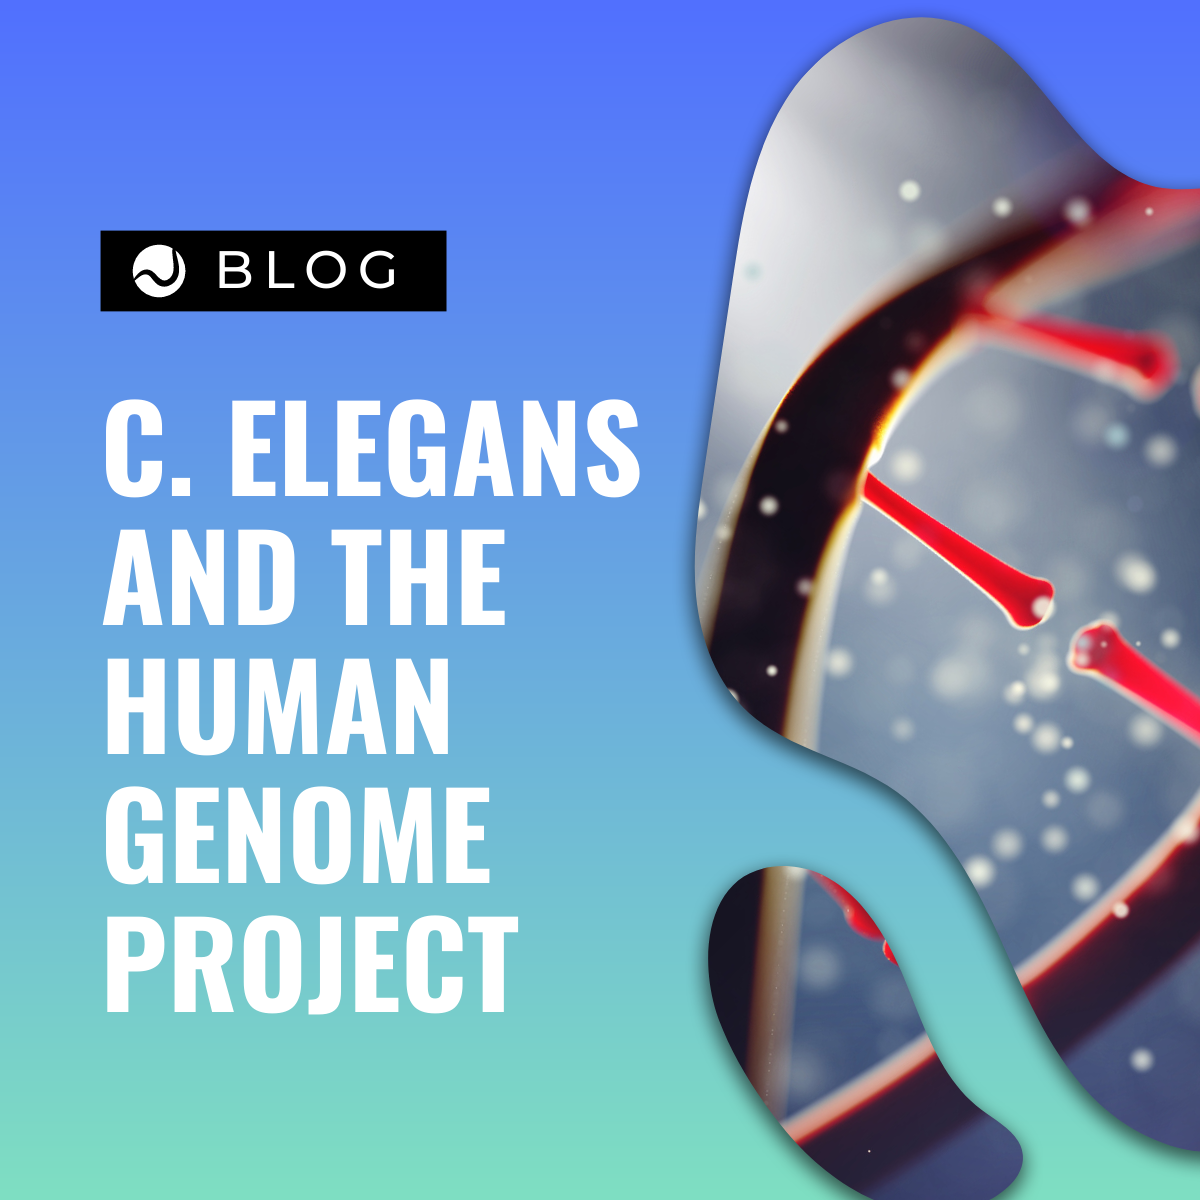 C. elegans and the Human Genome Project